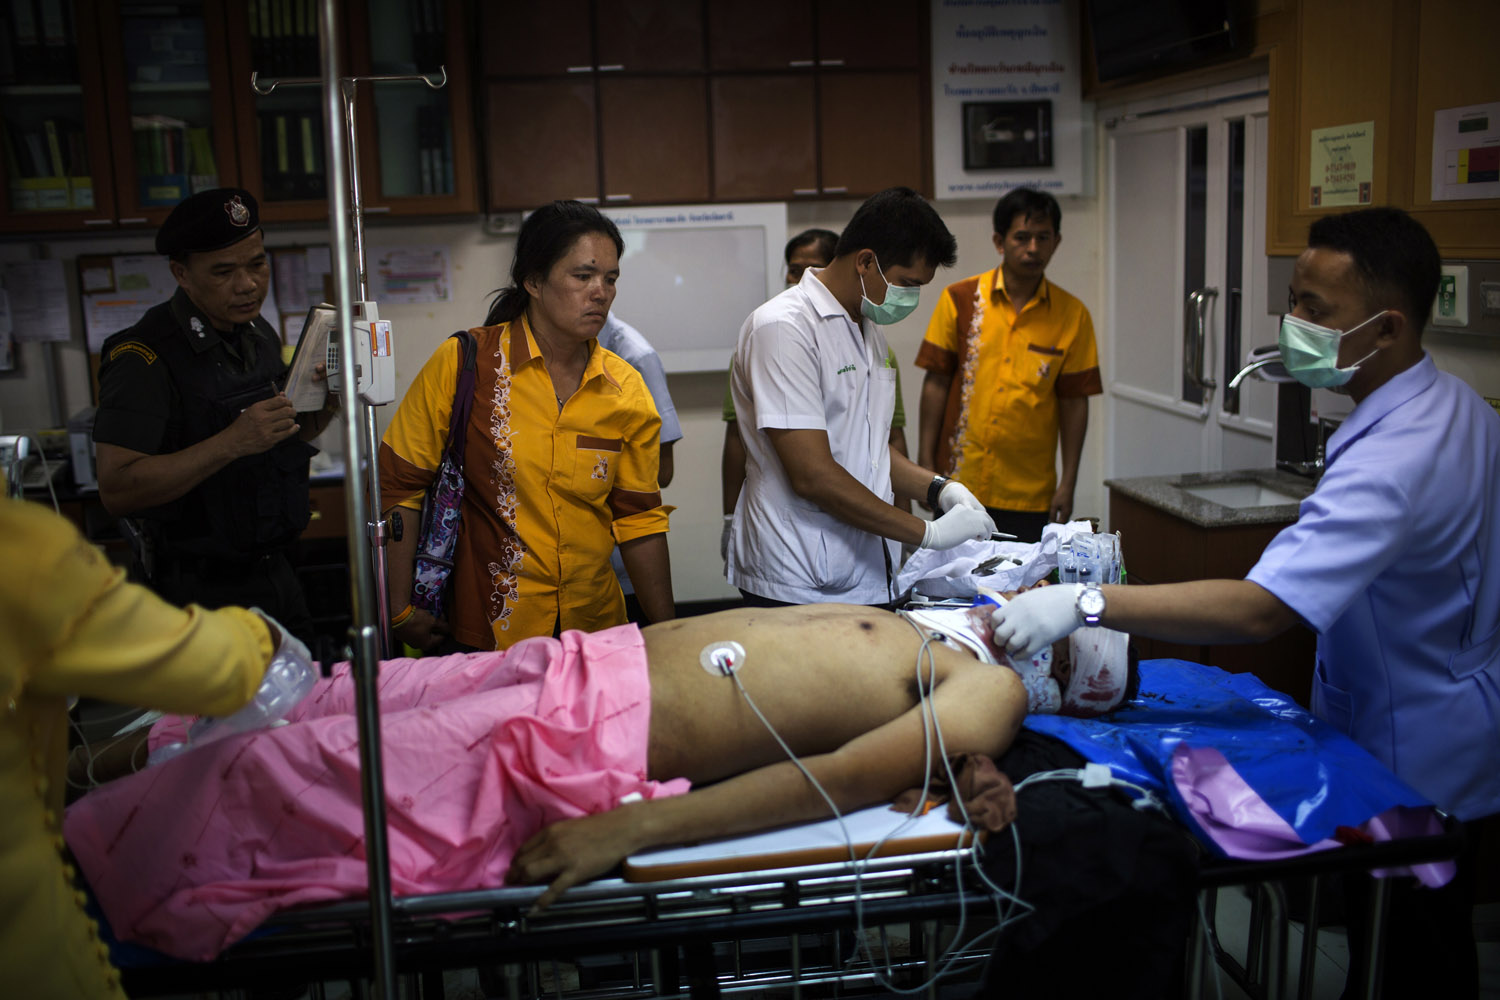 A teacher (2nd from left) that used to be protected by Thai Army Ranger, Chanchote Phetpong, 28 looks at his body in the Mass Casualty Zone of Yarang Hospital after he was announced dead from wounds received by a bomb whilst on a patrol to secure a peace meeting in Kradoh Village near Pattani, Southern Thailand on June 10, 2013. Two other Rangers were wounded. Thai Army and Rangers are often used to protect monks and teachers who are targets of militants in Southern Thailand.